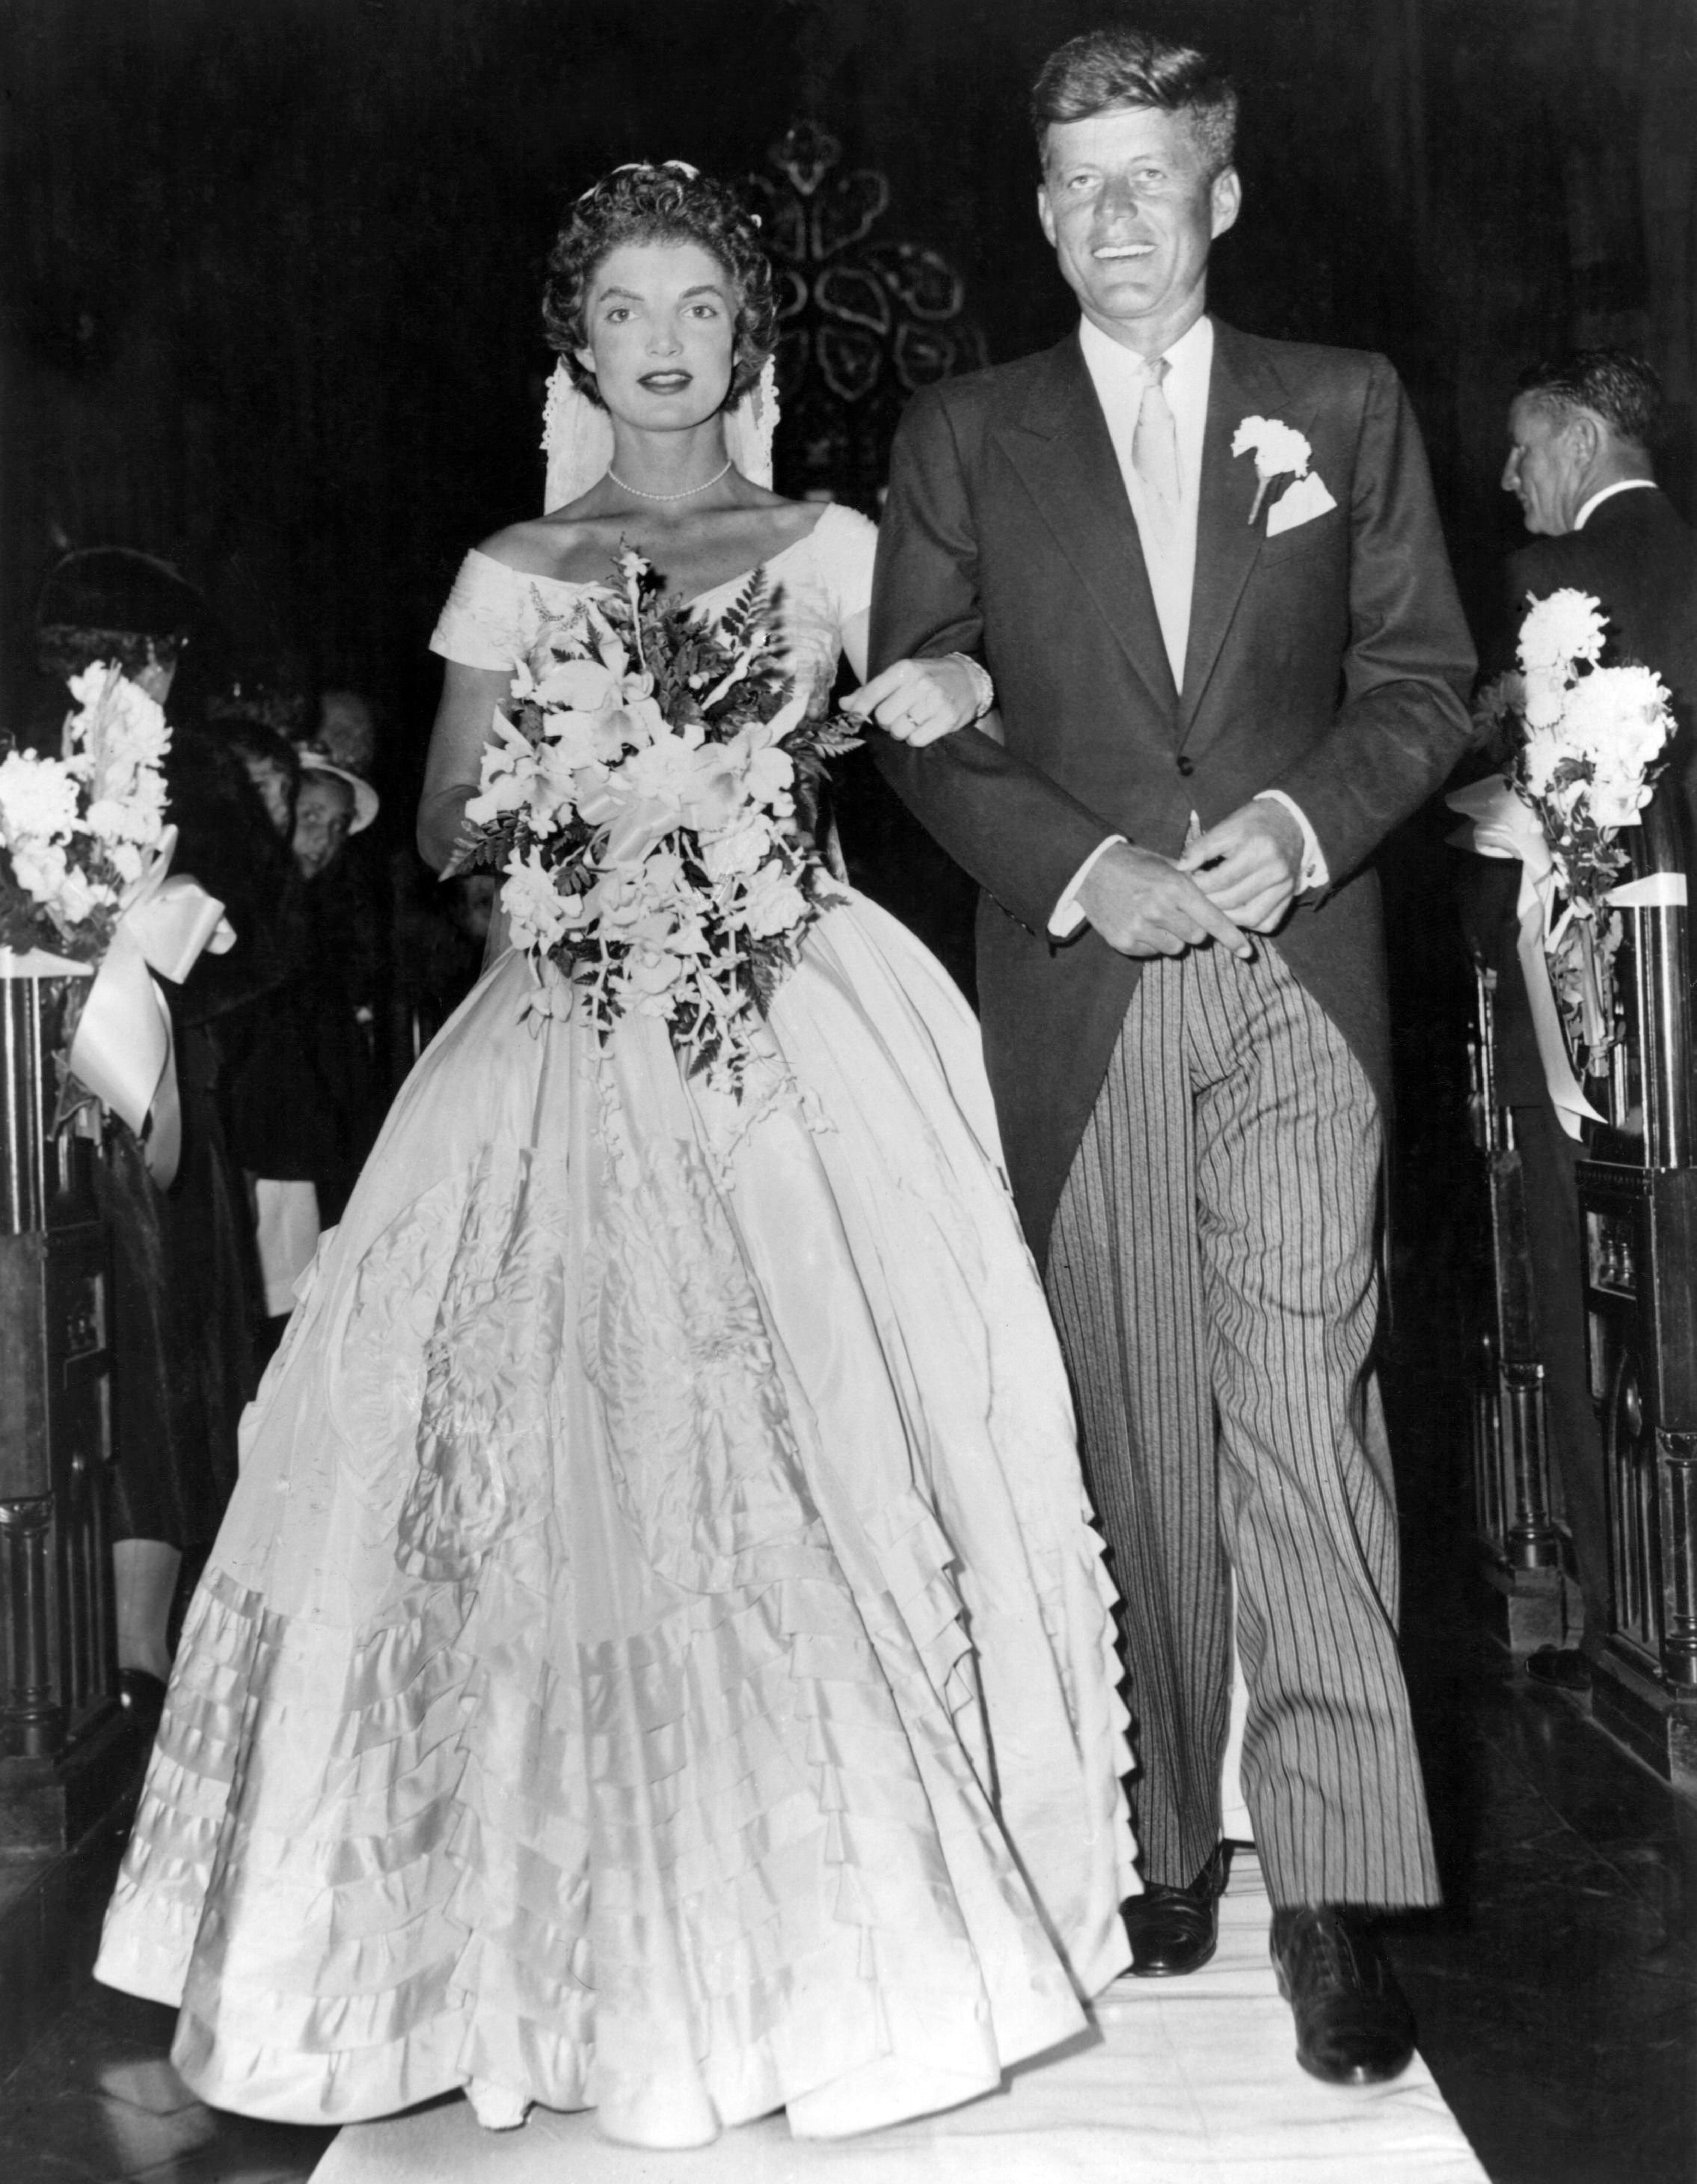 John F. Kennedy escorts his bride Jacqueline, shortly after their wedding ceremony on September 12, 1953, at Newport, Rhode Island | Source: Getty Images